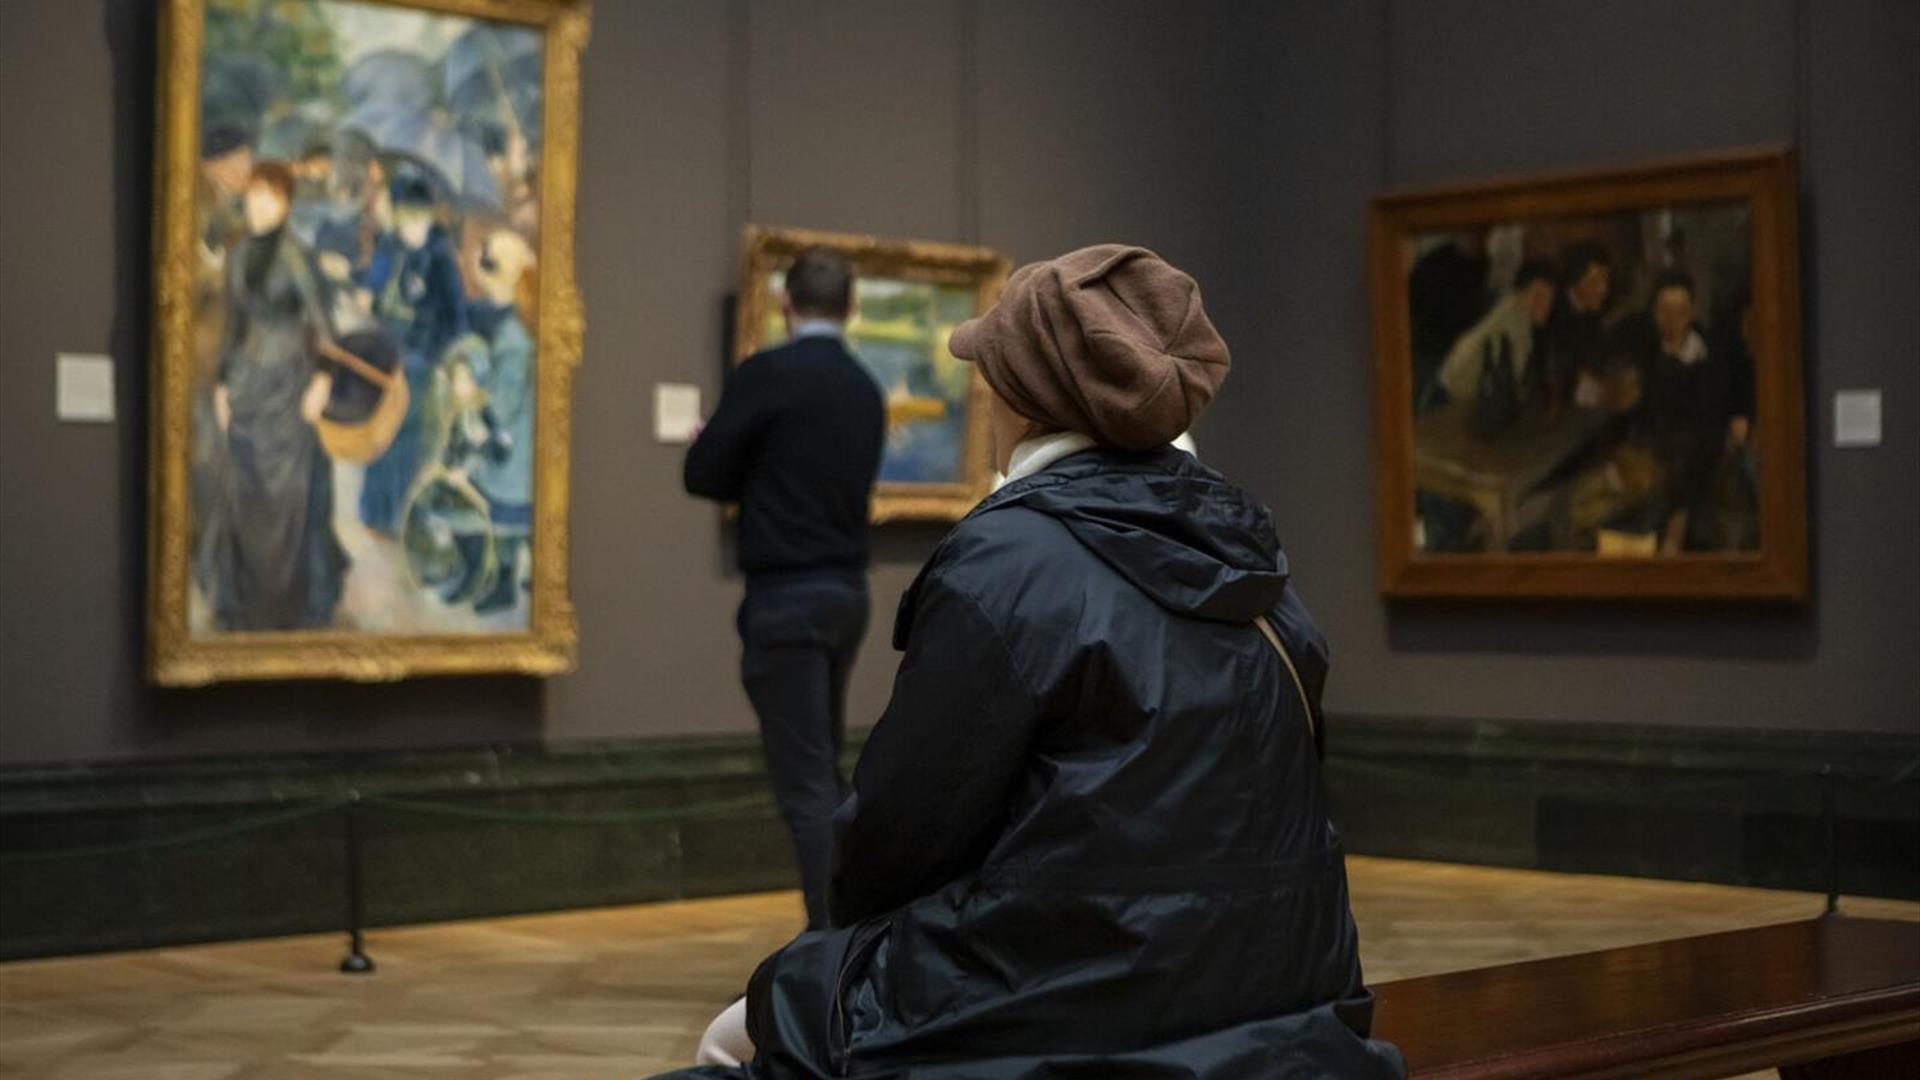 Picture of 2 people looking at works of art, one is sitting and one is standing